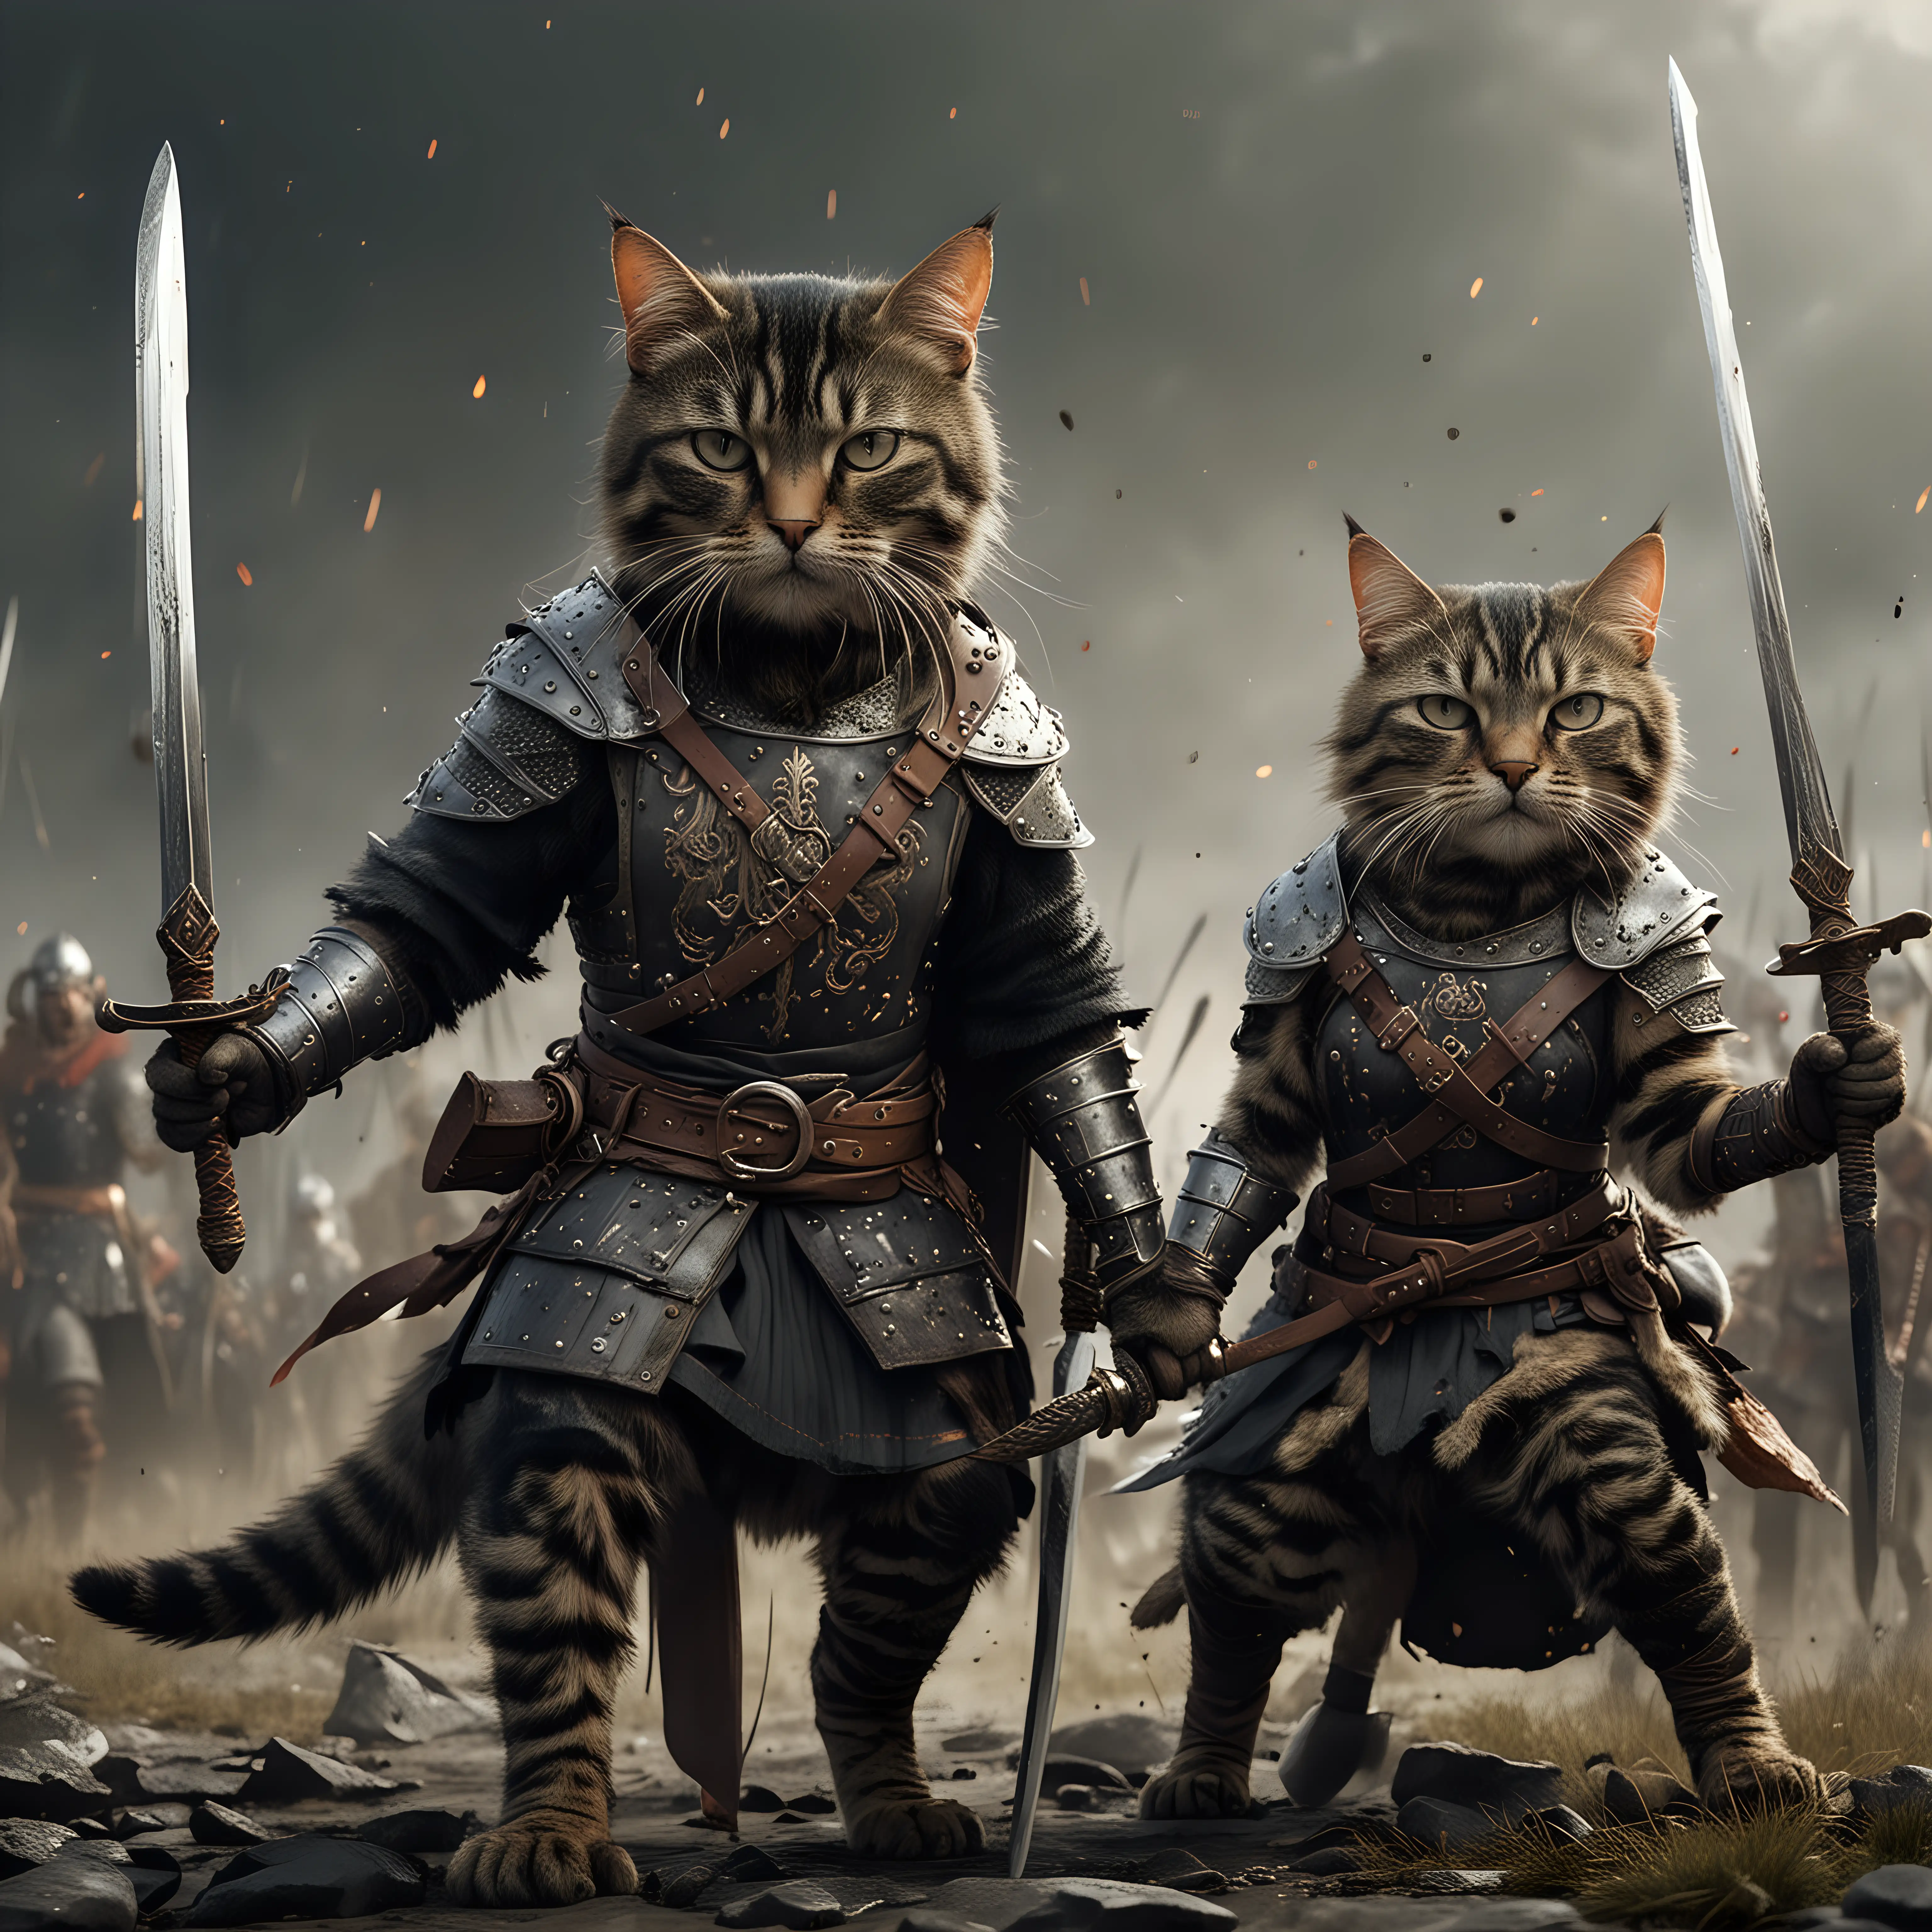 Highest Image quality, two anthropomorphic, black tabby cats, human sized, one male and one female, angry facial expressions, dressed as Viking warriors, wielding shields and swords in battle